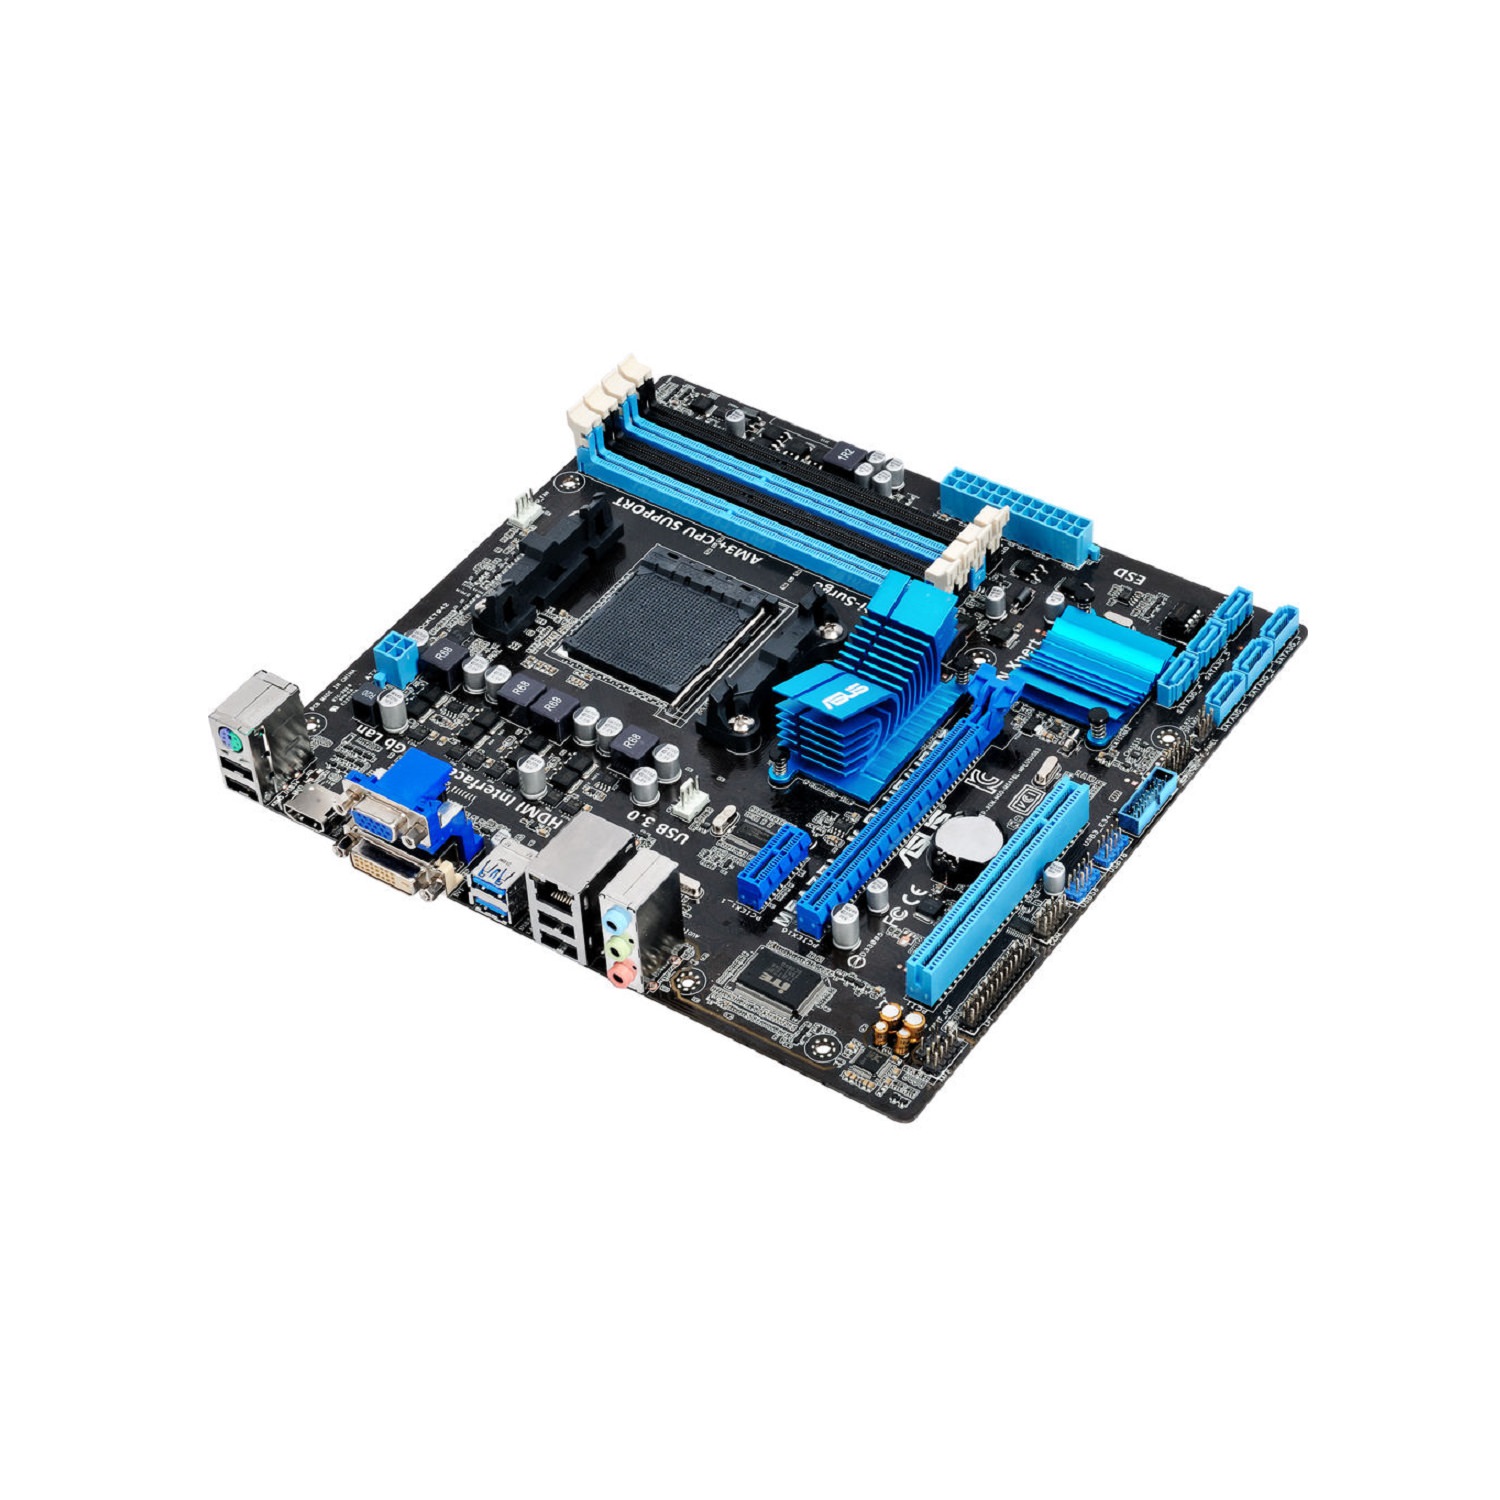 Asus M5A78L-M Plus/Usb3 Motherboard - M5A78L-M PLUS/USB3 - image 2 of 4